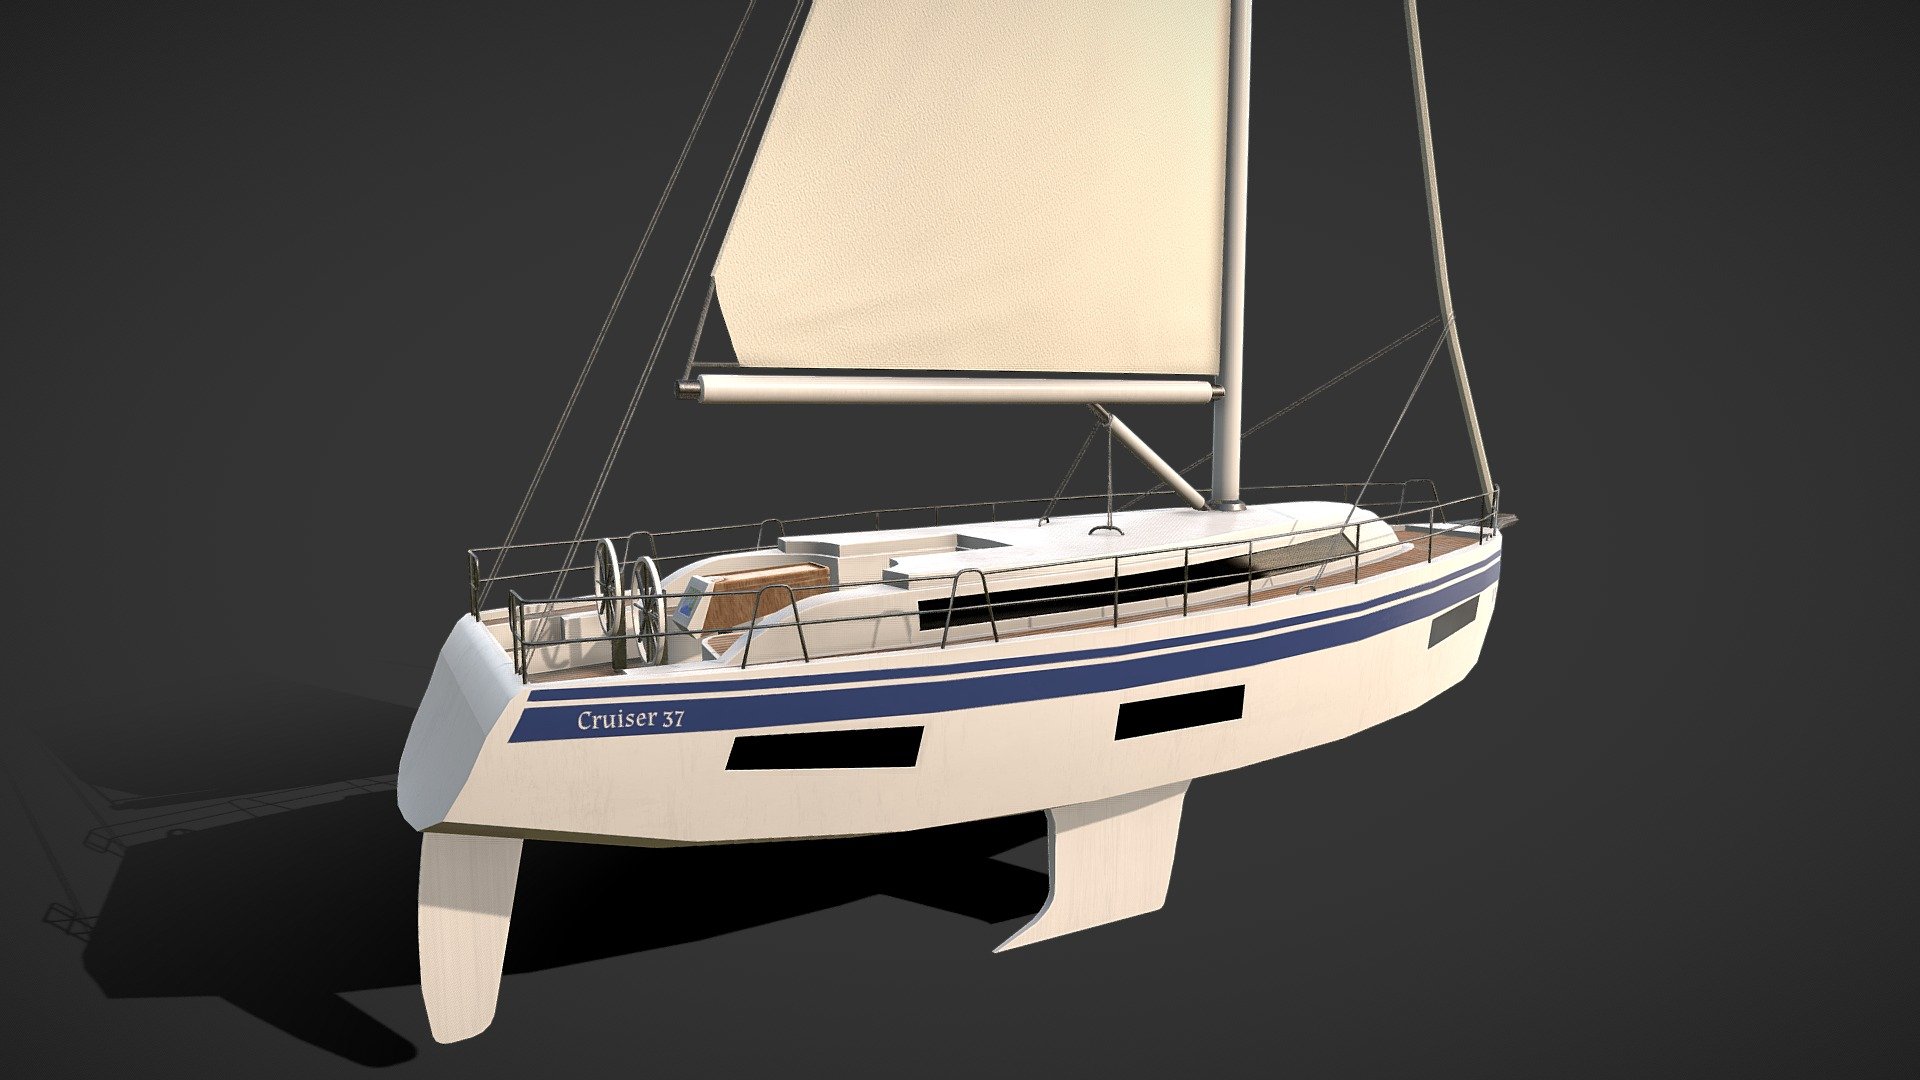 Sailing Boat Bavaria Cruiser 37 is both an hobby and dream model for me. I simplified some details to make the model game-ready and lowpoly and I want to apologize from enthusiasts of the boat. 

Modelled in blender and textured in Substance 3D Painter with PBR principles. 
The boat and sail fabrics are seperated for optional uses. Not rigged. 

Model Dimensions with pole and tail: 4.38m x 12.5m x 19m - Sailing Boat Bavaria Cruiser 37 - 3D model by pixelAlp 3d model